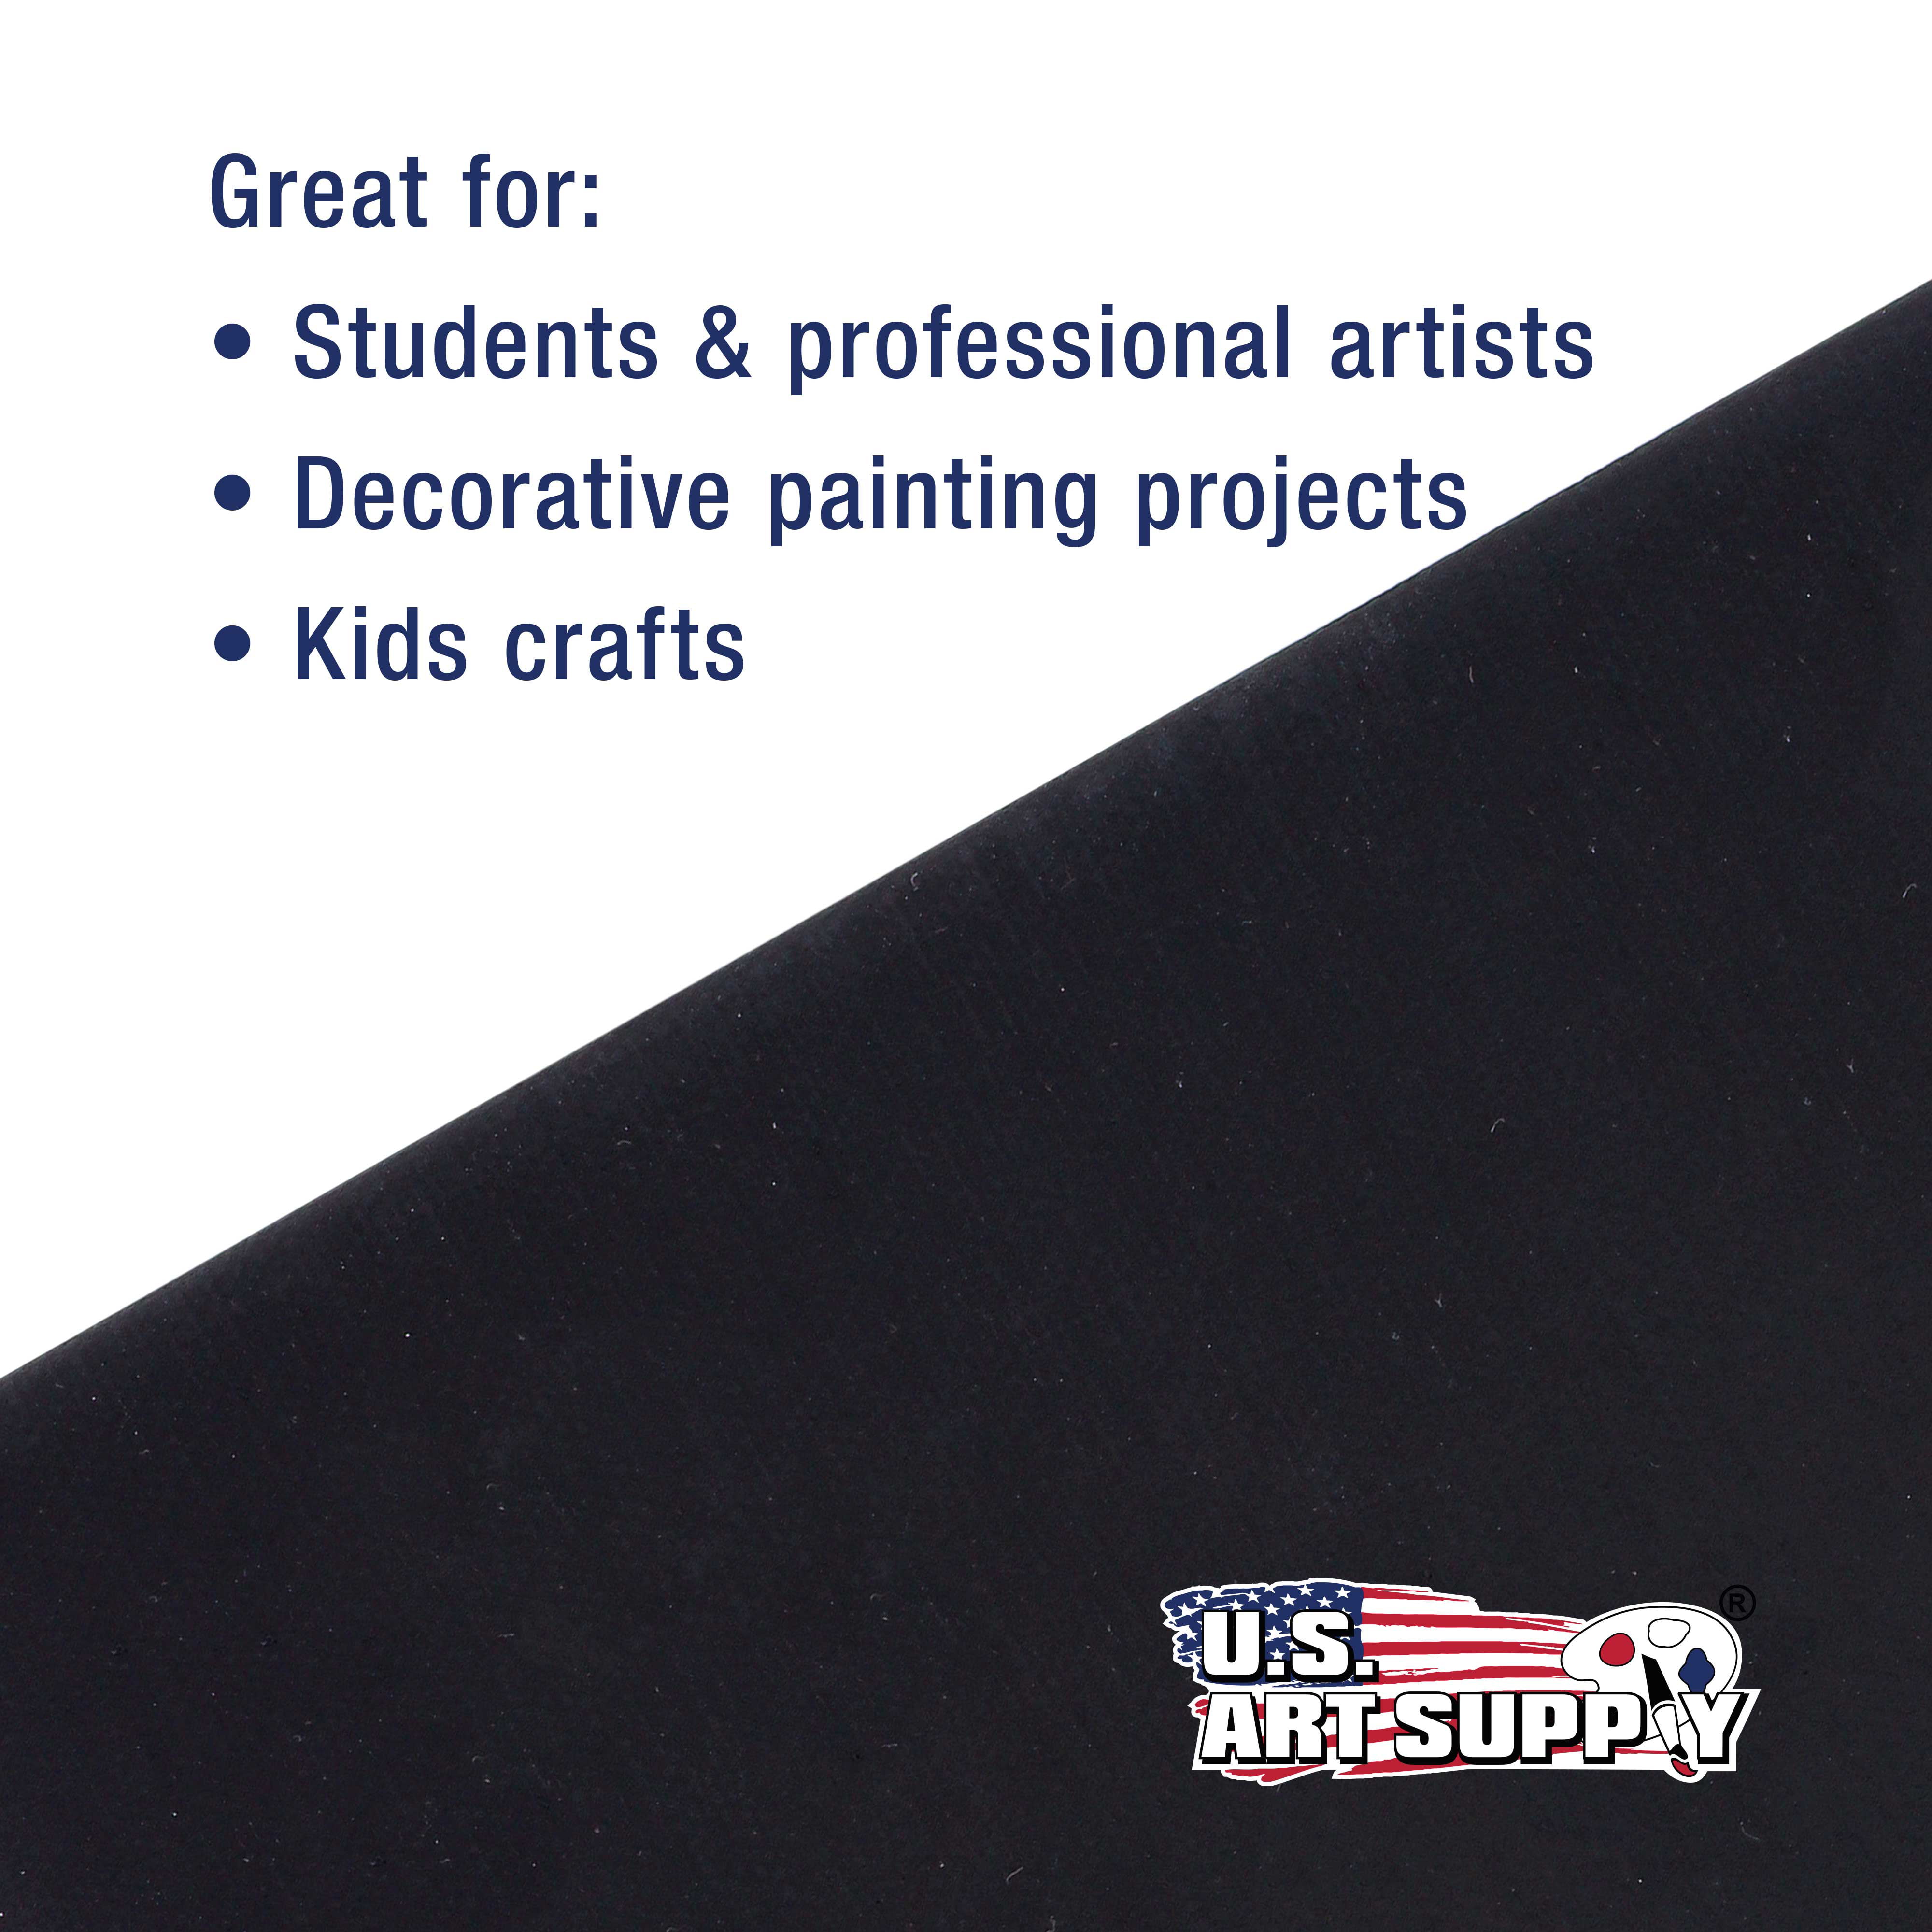 US Art Supply 8 X 10 inch Black Professional Artist Quality Acid Free Canvas Panels 6-Pack 1 Full Case of 6 Single Canvas Panels 